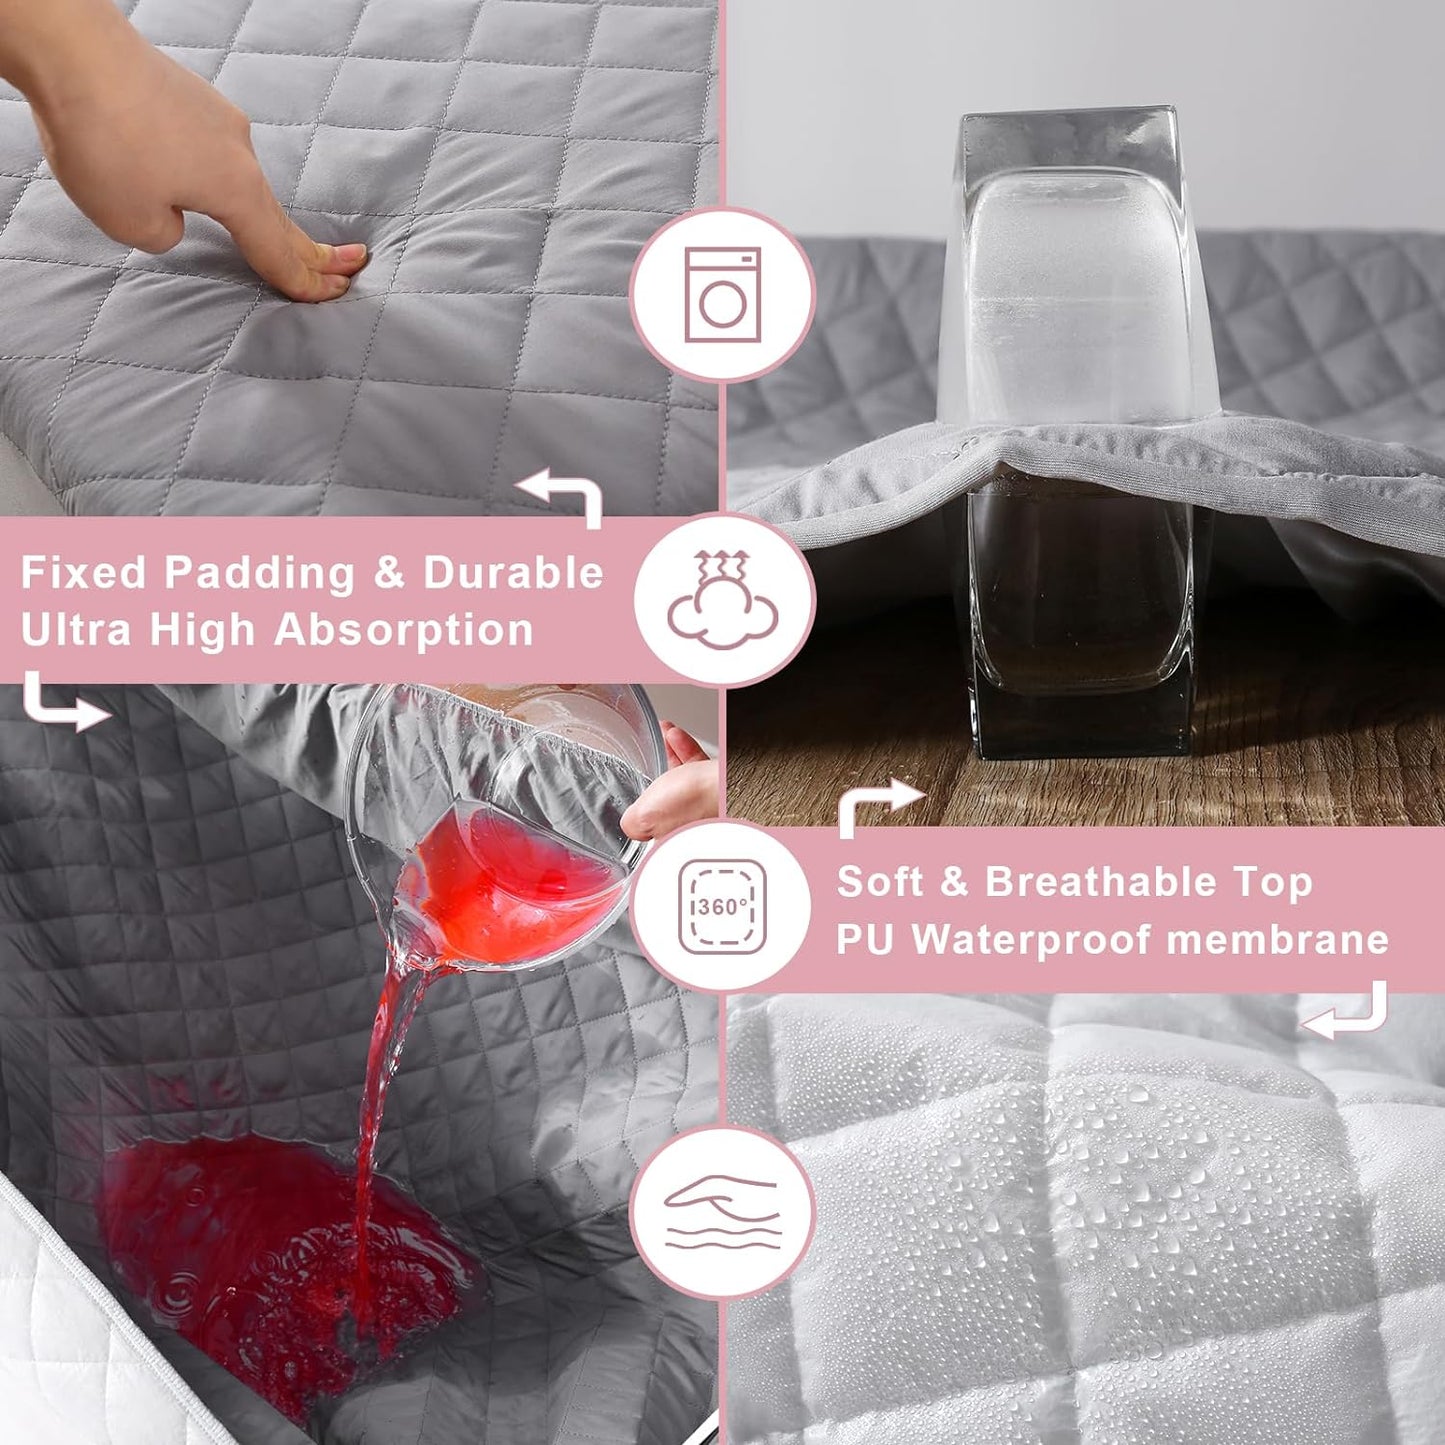 Bedecor Air Mattress Pad Waterproof Mattress Cover Gray, Quilted Air Bed Mattress Protector Heavy Absorbent Soft Breathable & Noiseless Mattress Pad Fitted Deep Pocket Up to 18"